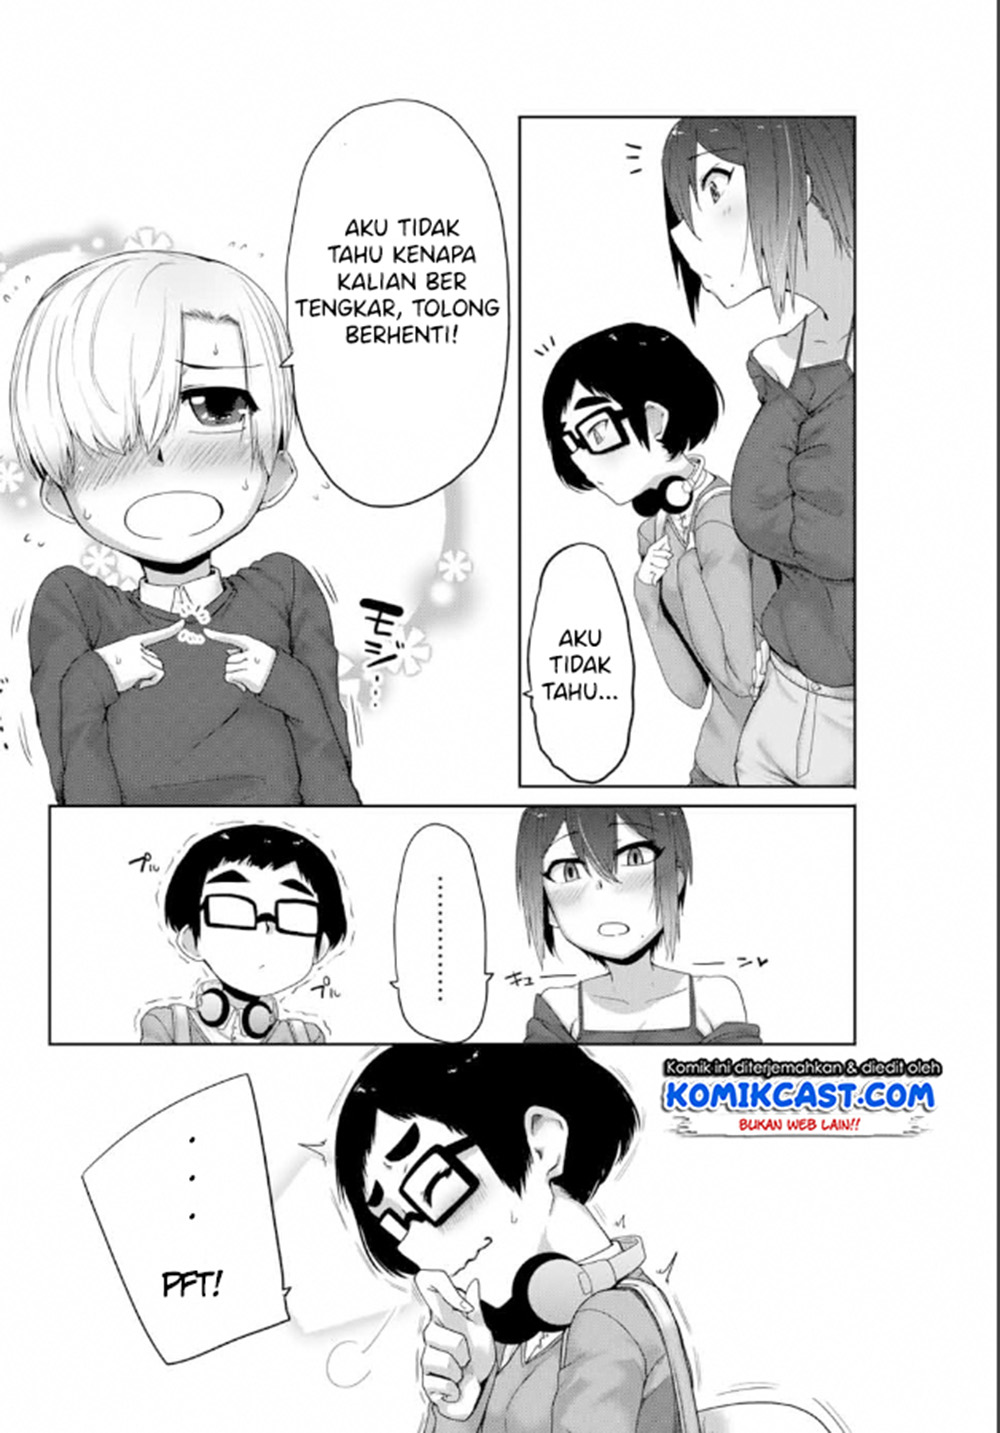 The Girl with a Kansai Accent and the Pure Boy Chapter 07 9